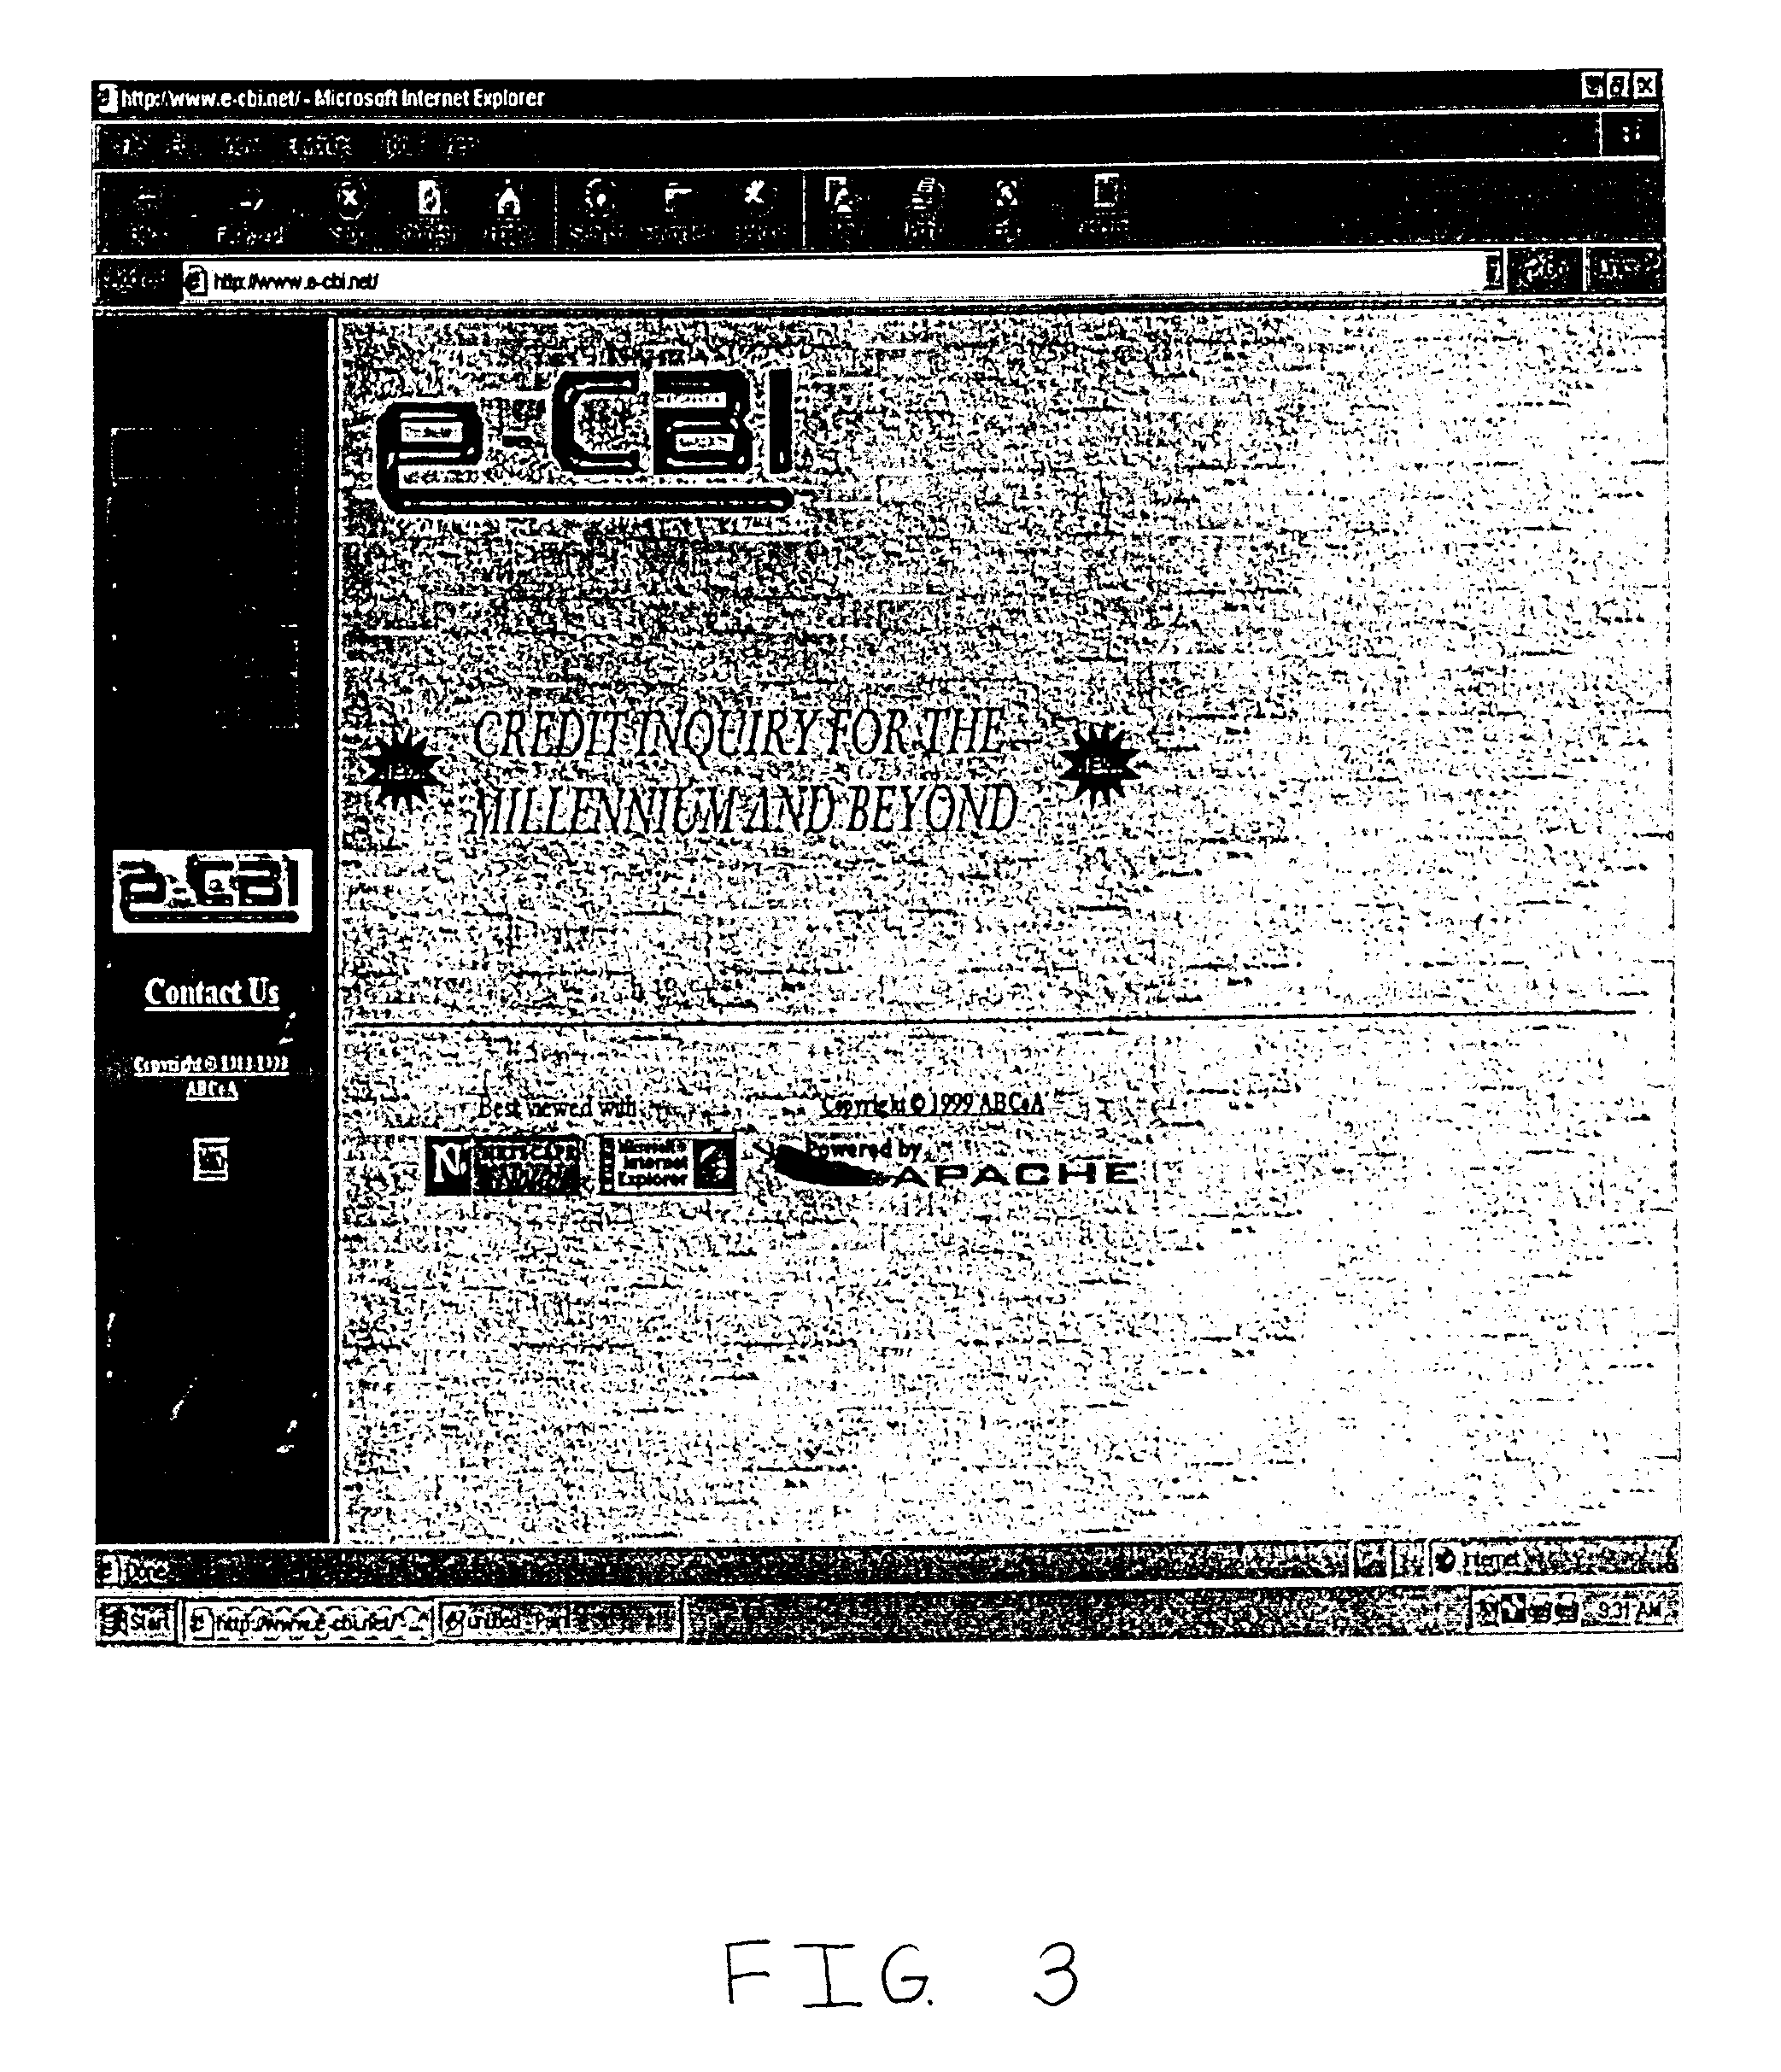 System and method for real-time inquiry, delivery, and reporting of credit information